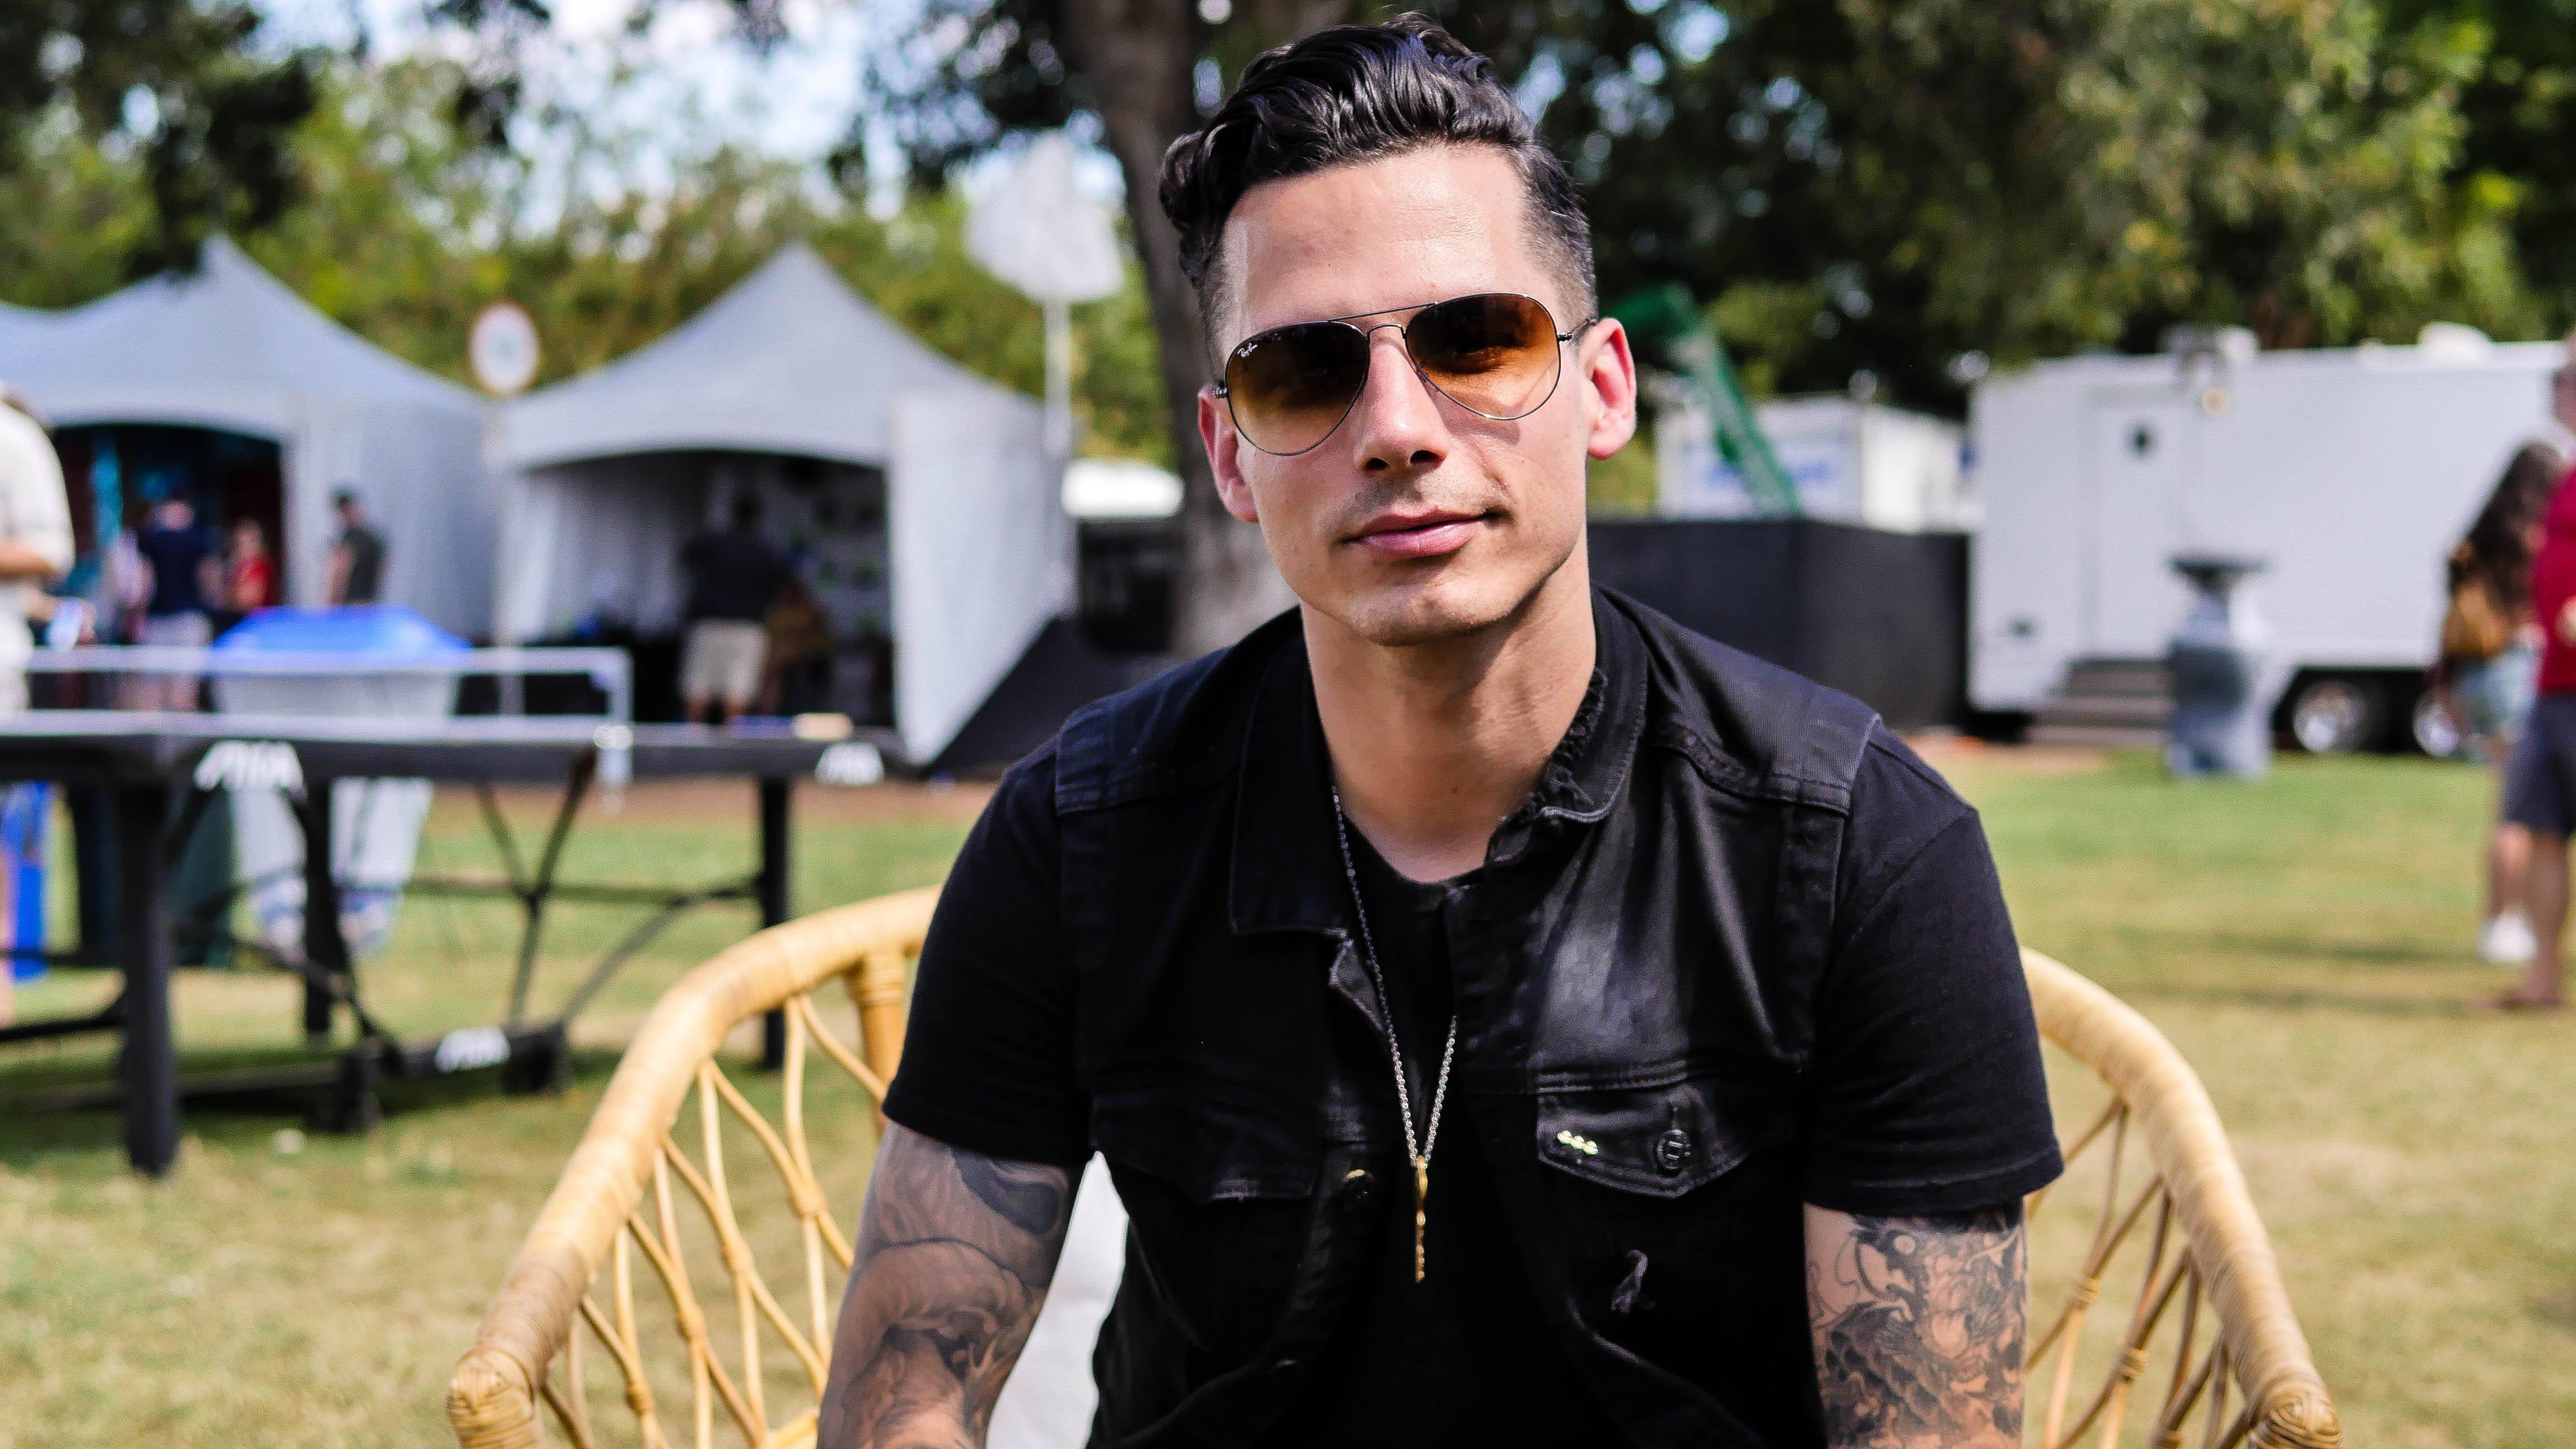 Devin Dawson photographed at the 2017 ACL Music Festival